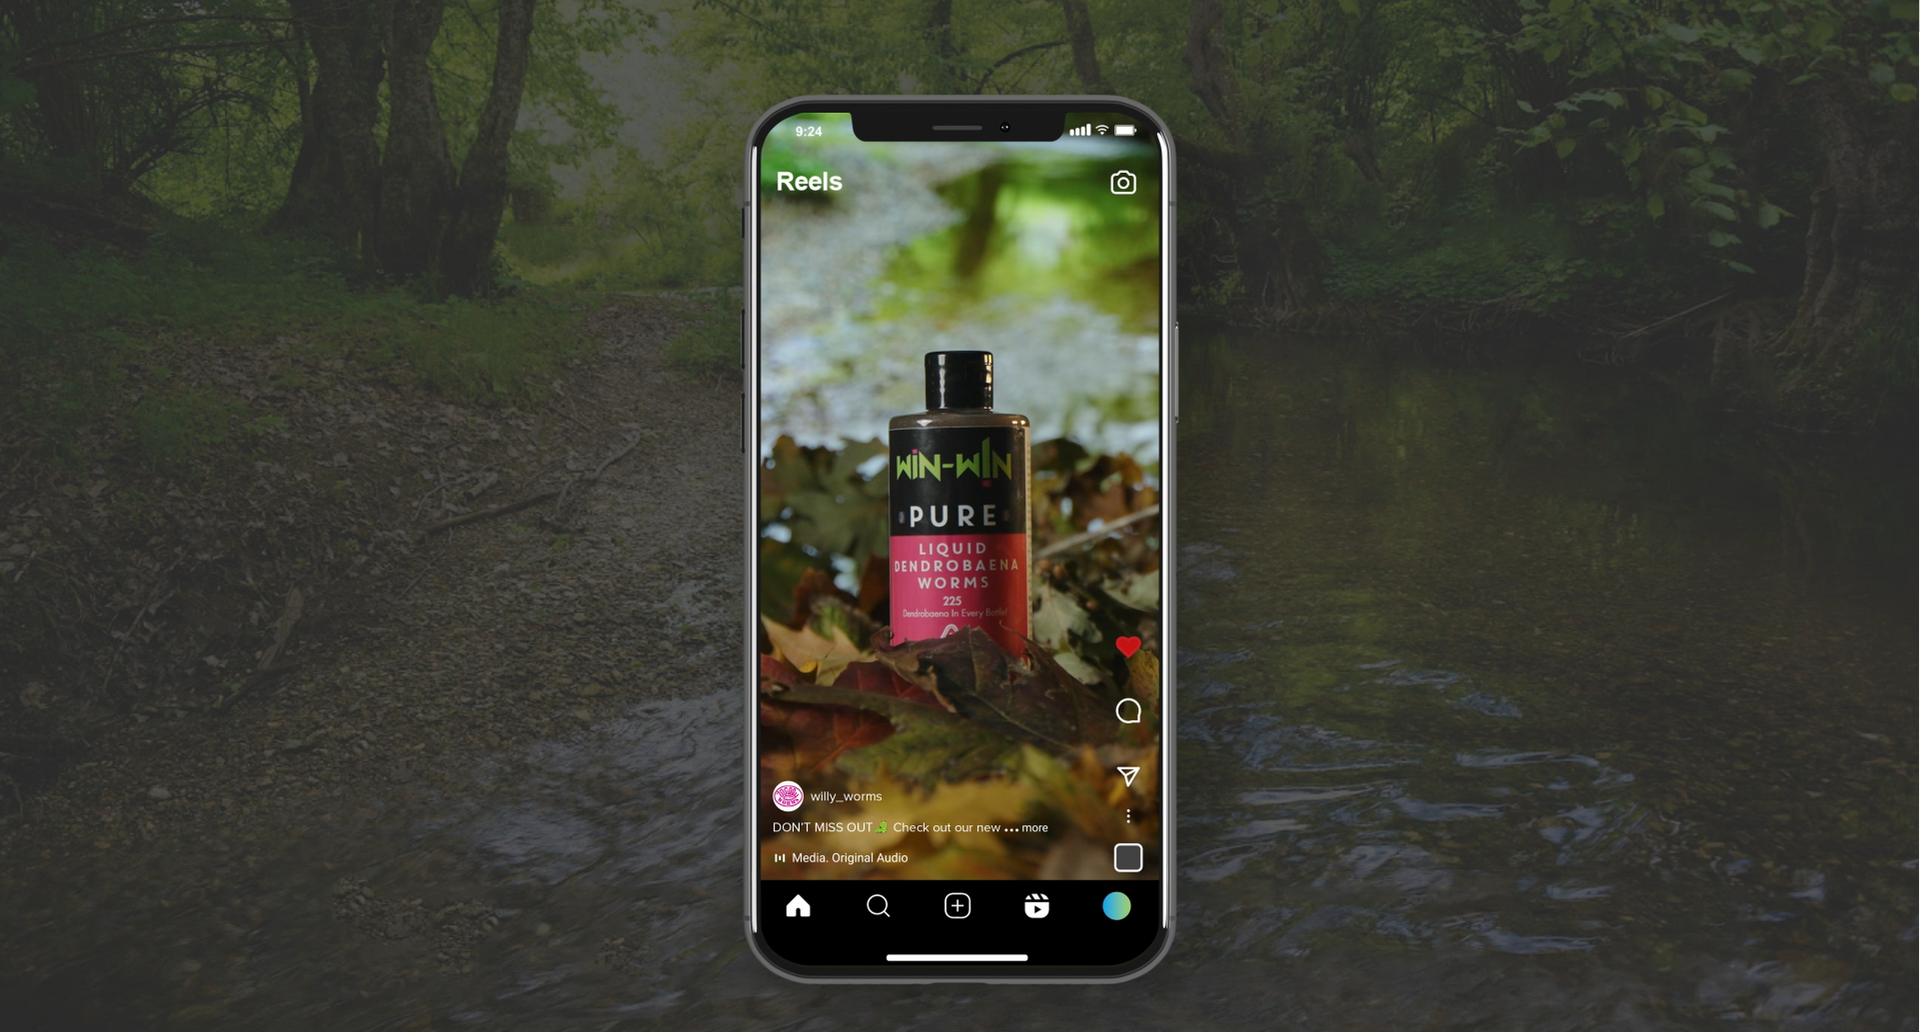 A cell phone is displaying a picture of a bottle of perfume in the woods.